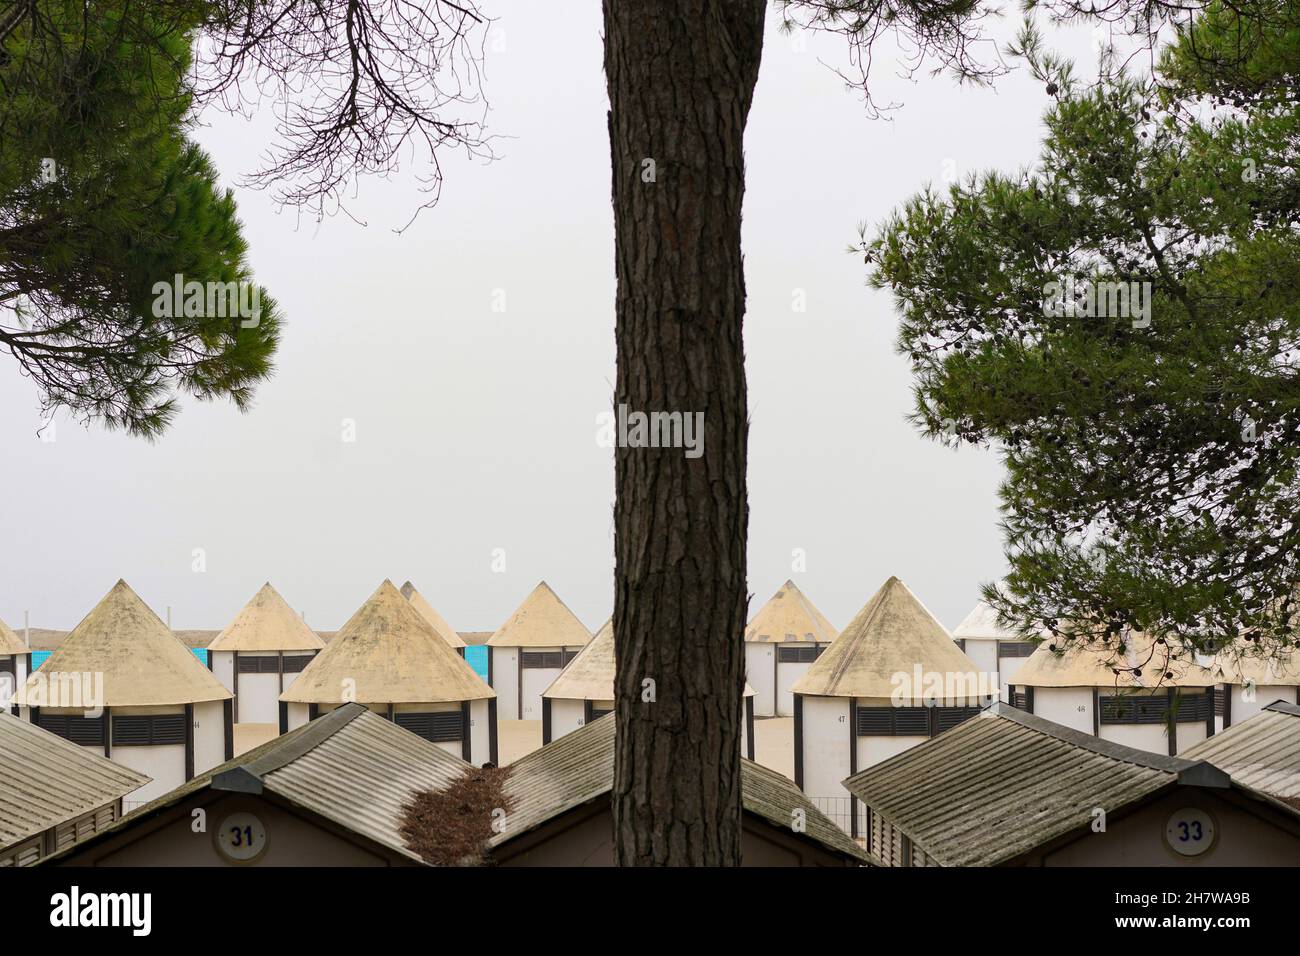 View of the beach of Lido, an island in the lagoon of Venice in autumn with numerous beach houses for tourists. Stock Photo